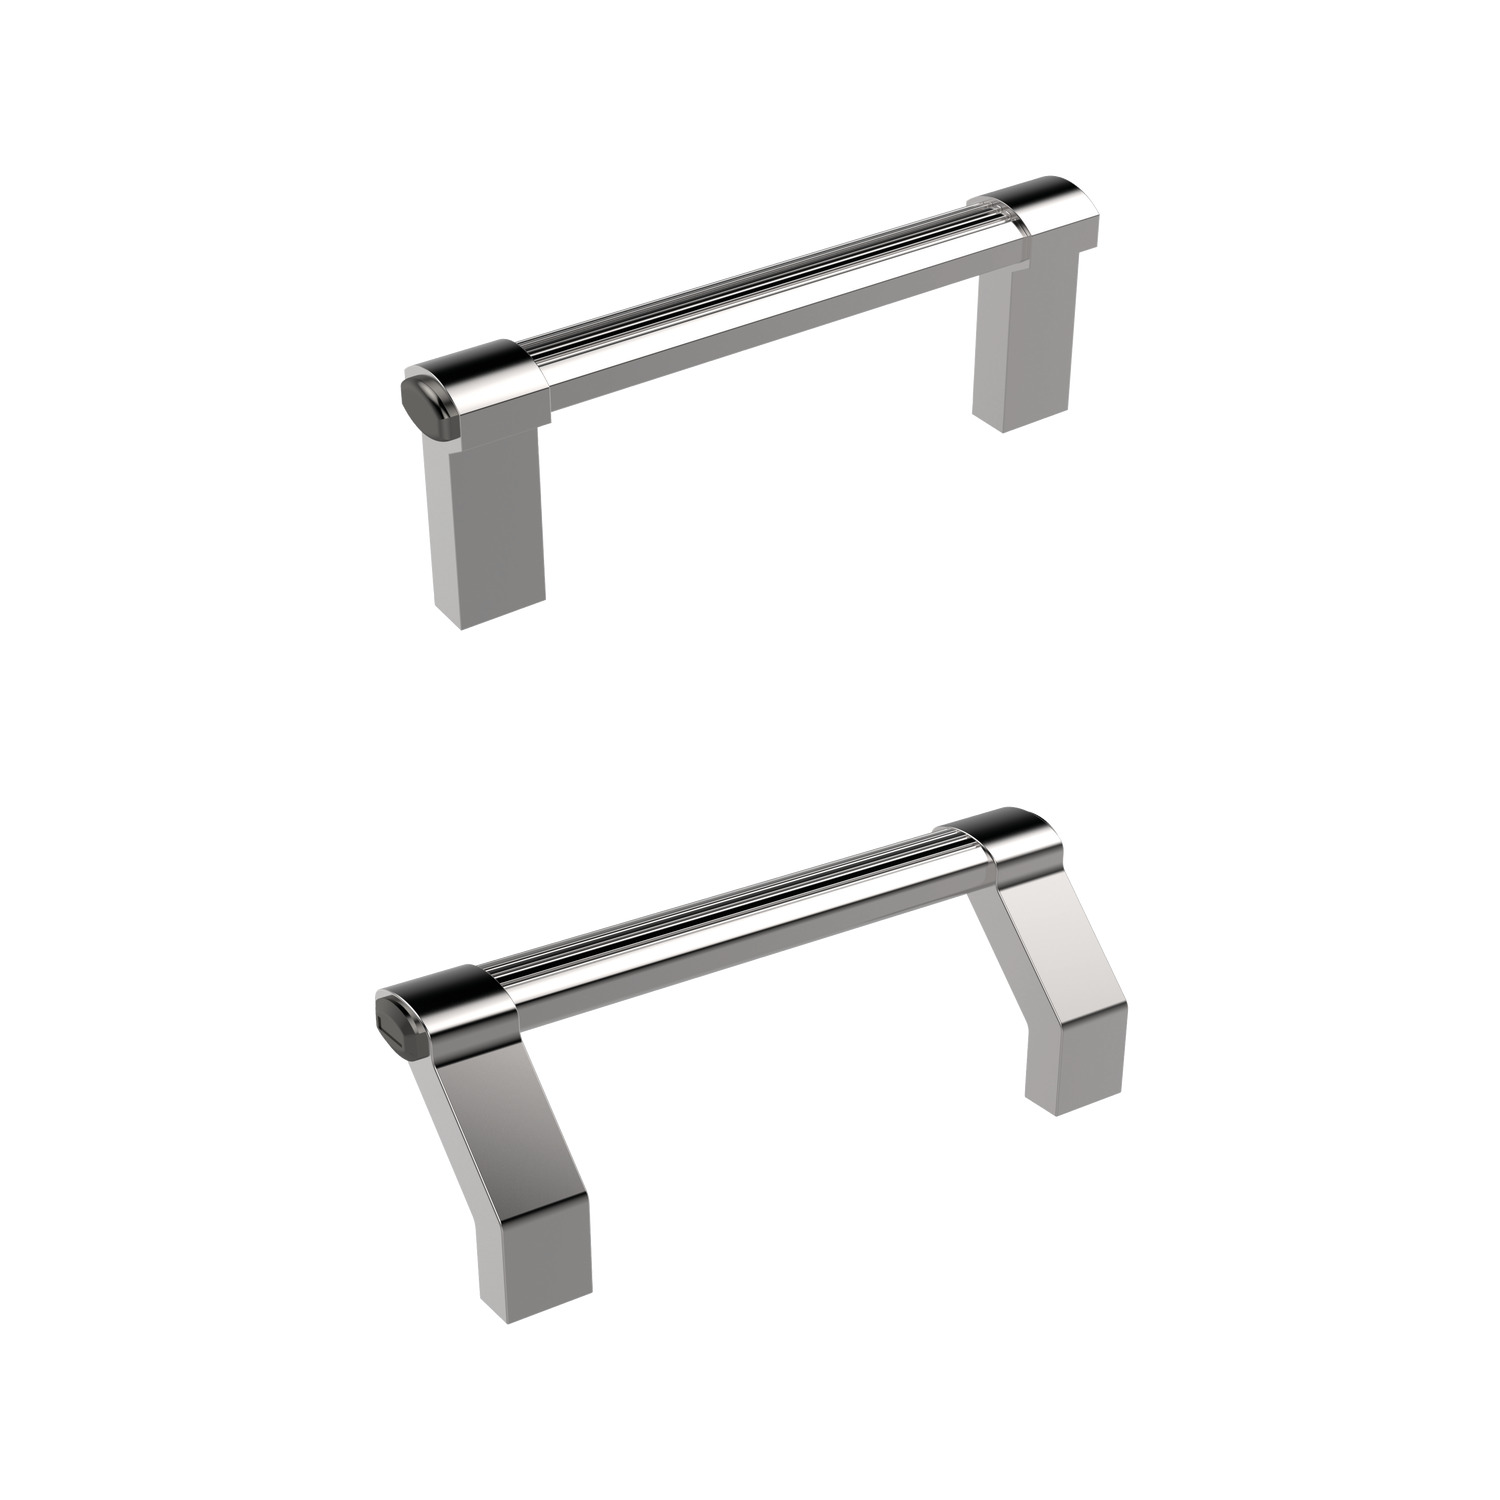 Pull Handles - Heavy Duty Heavy duty pull handles for various usages in a wide range of materials, shapes and sizes.